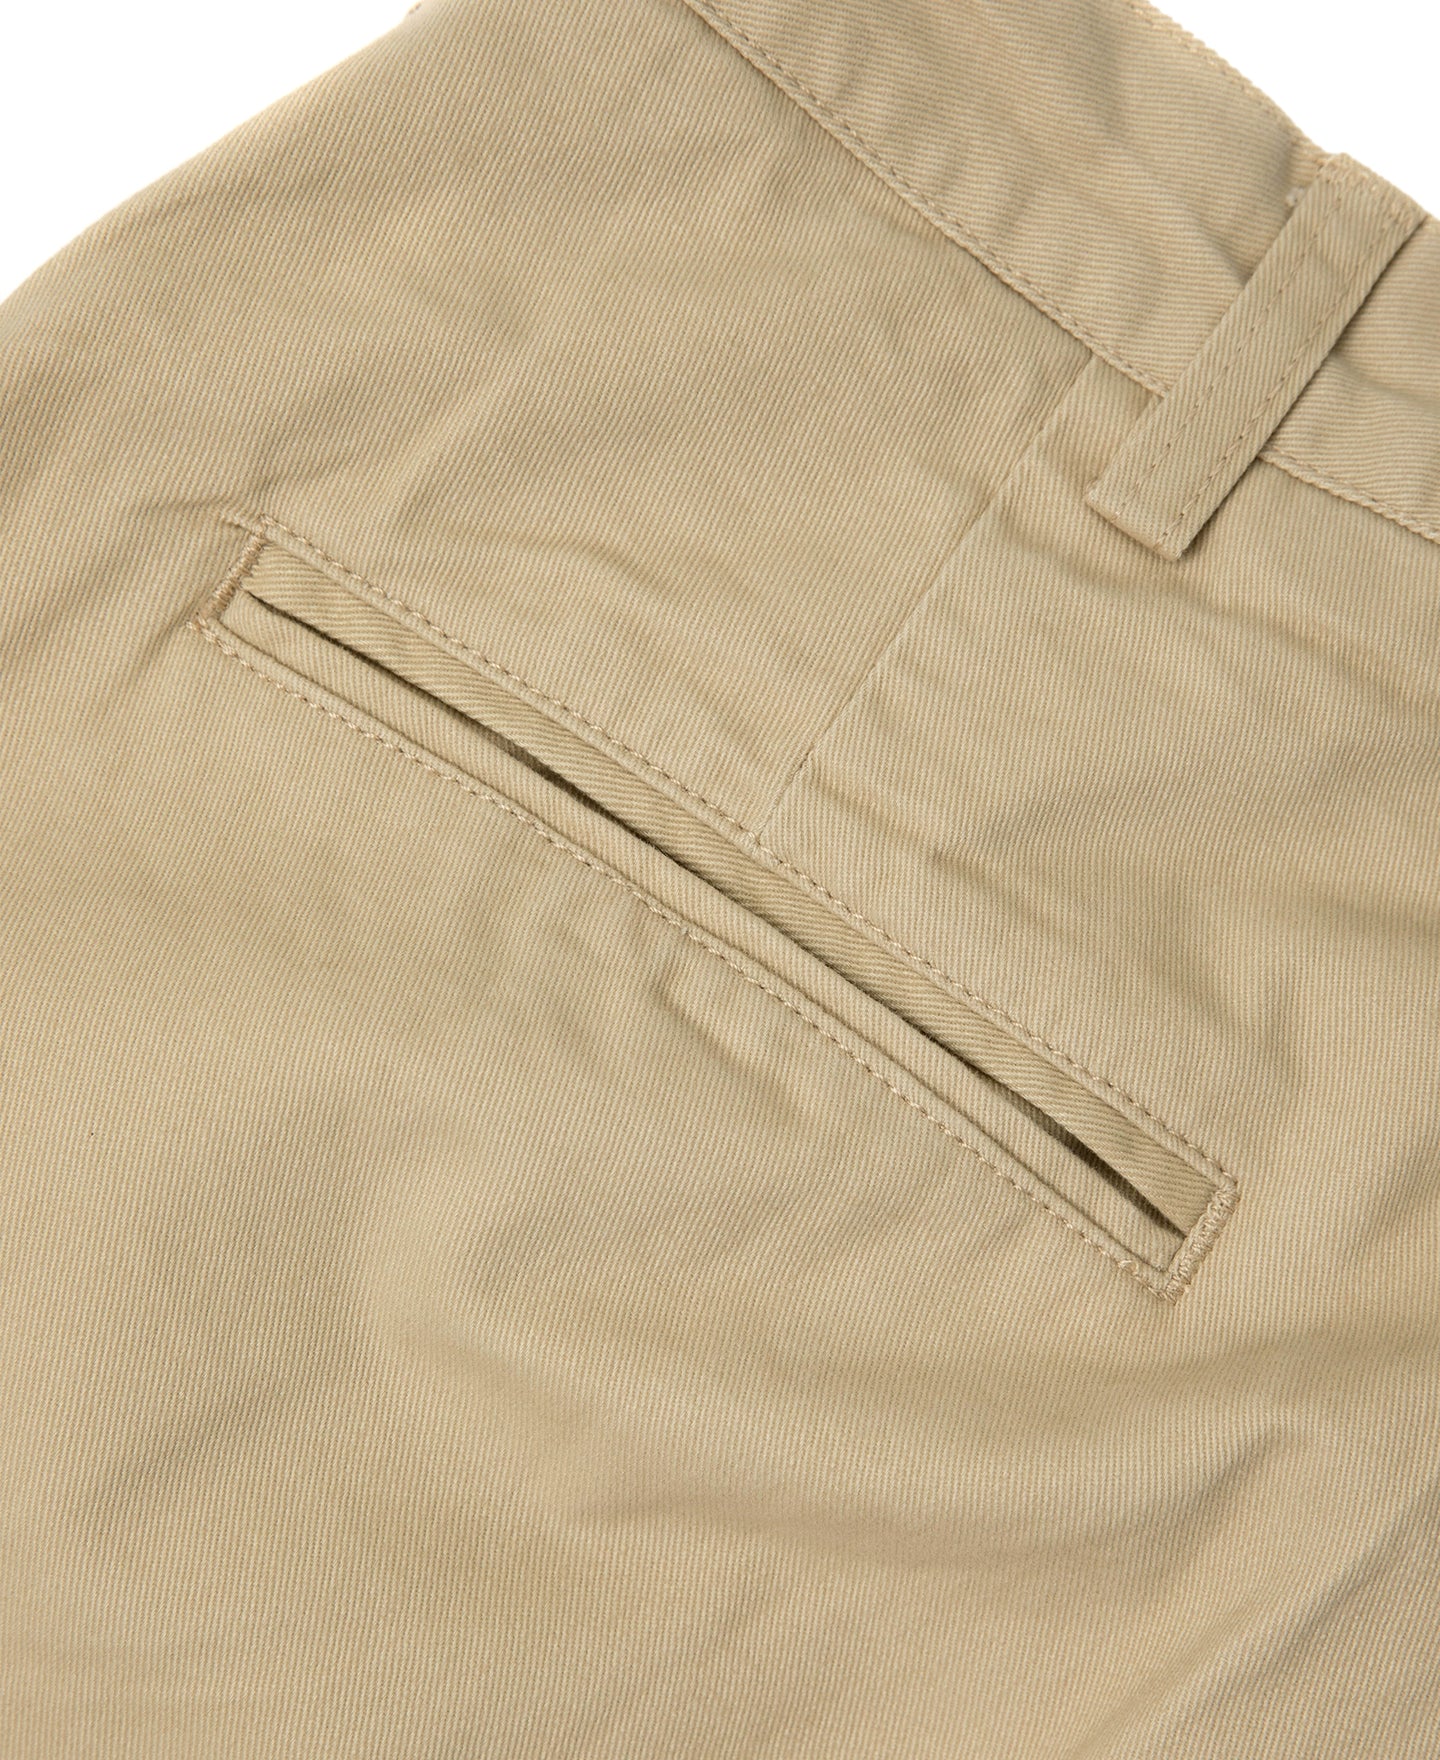 Ruggers Chinos Trousers - Buy Ruggers Chinos Trousers online in India